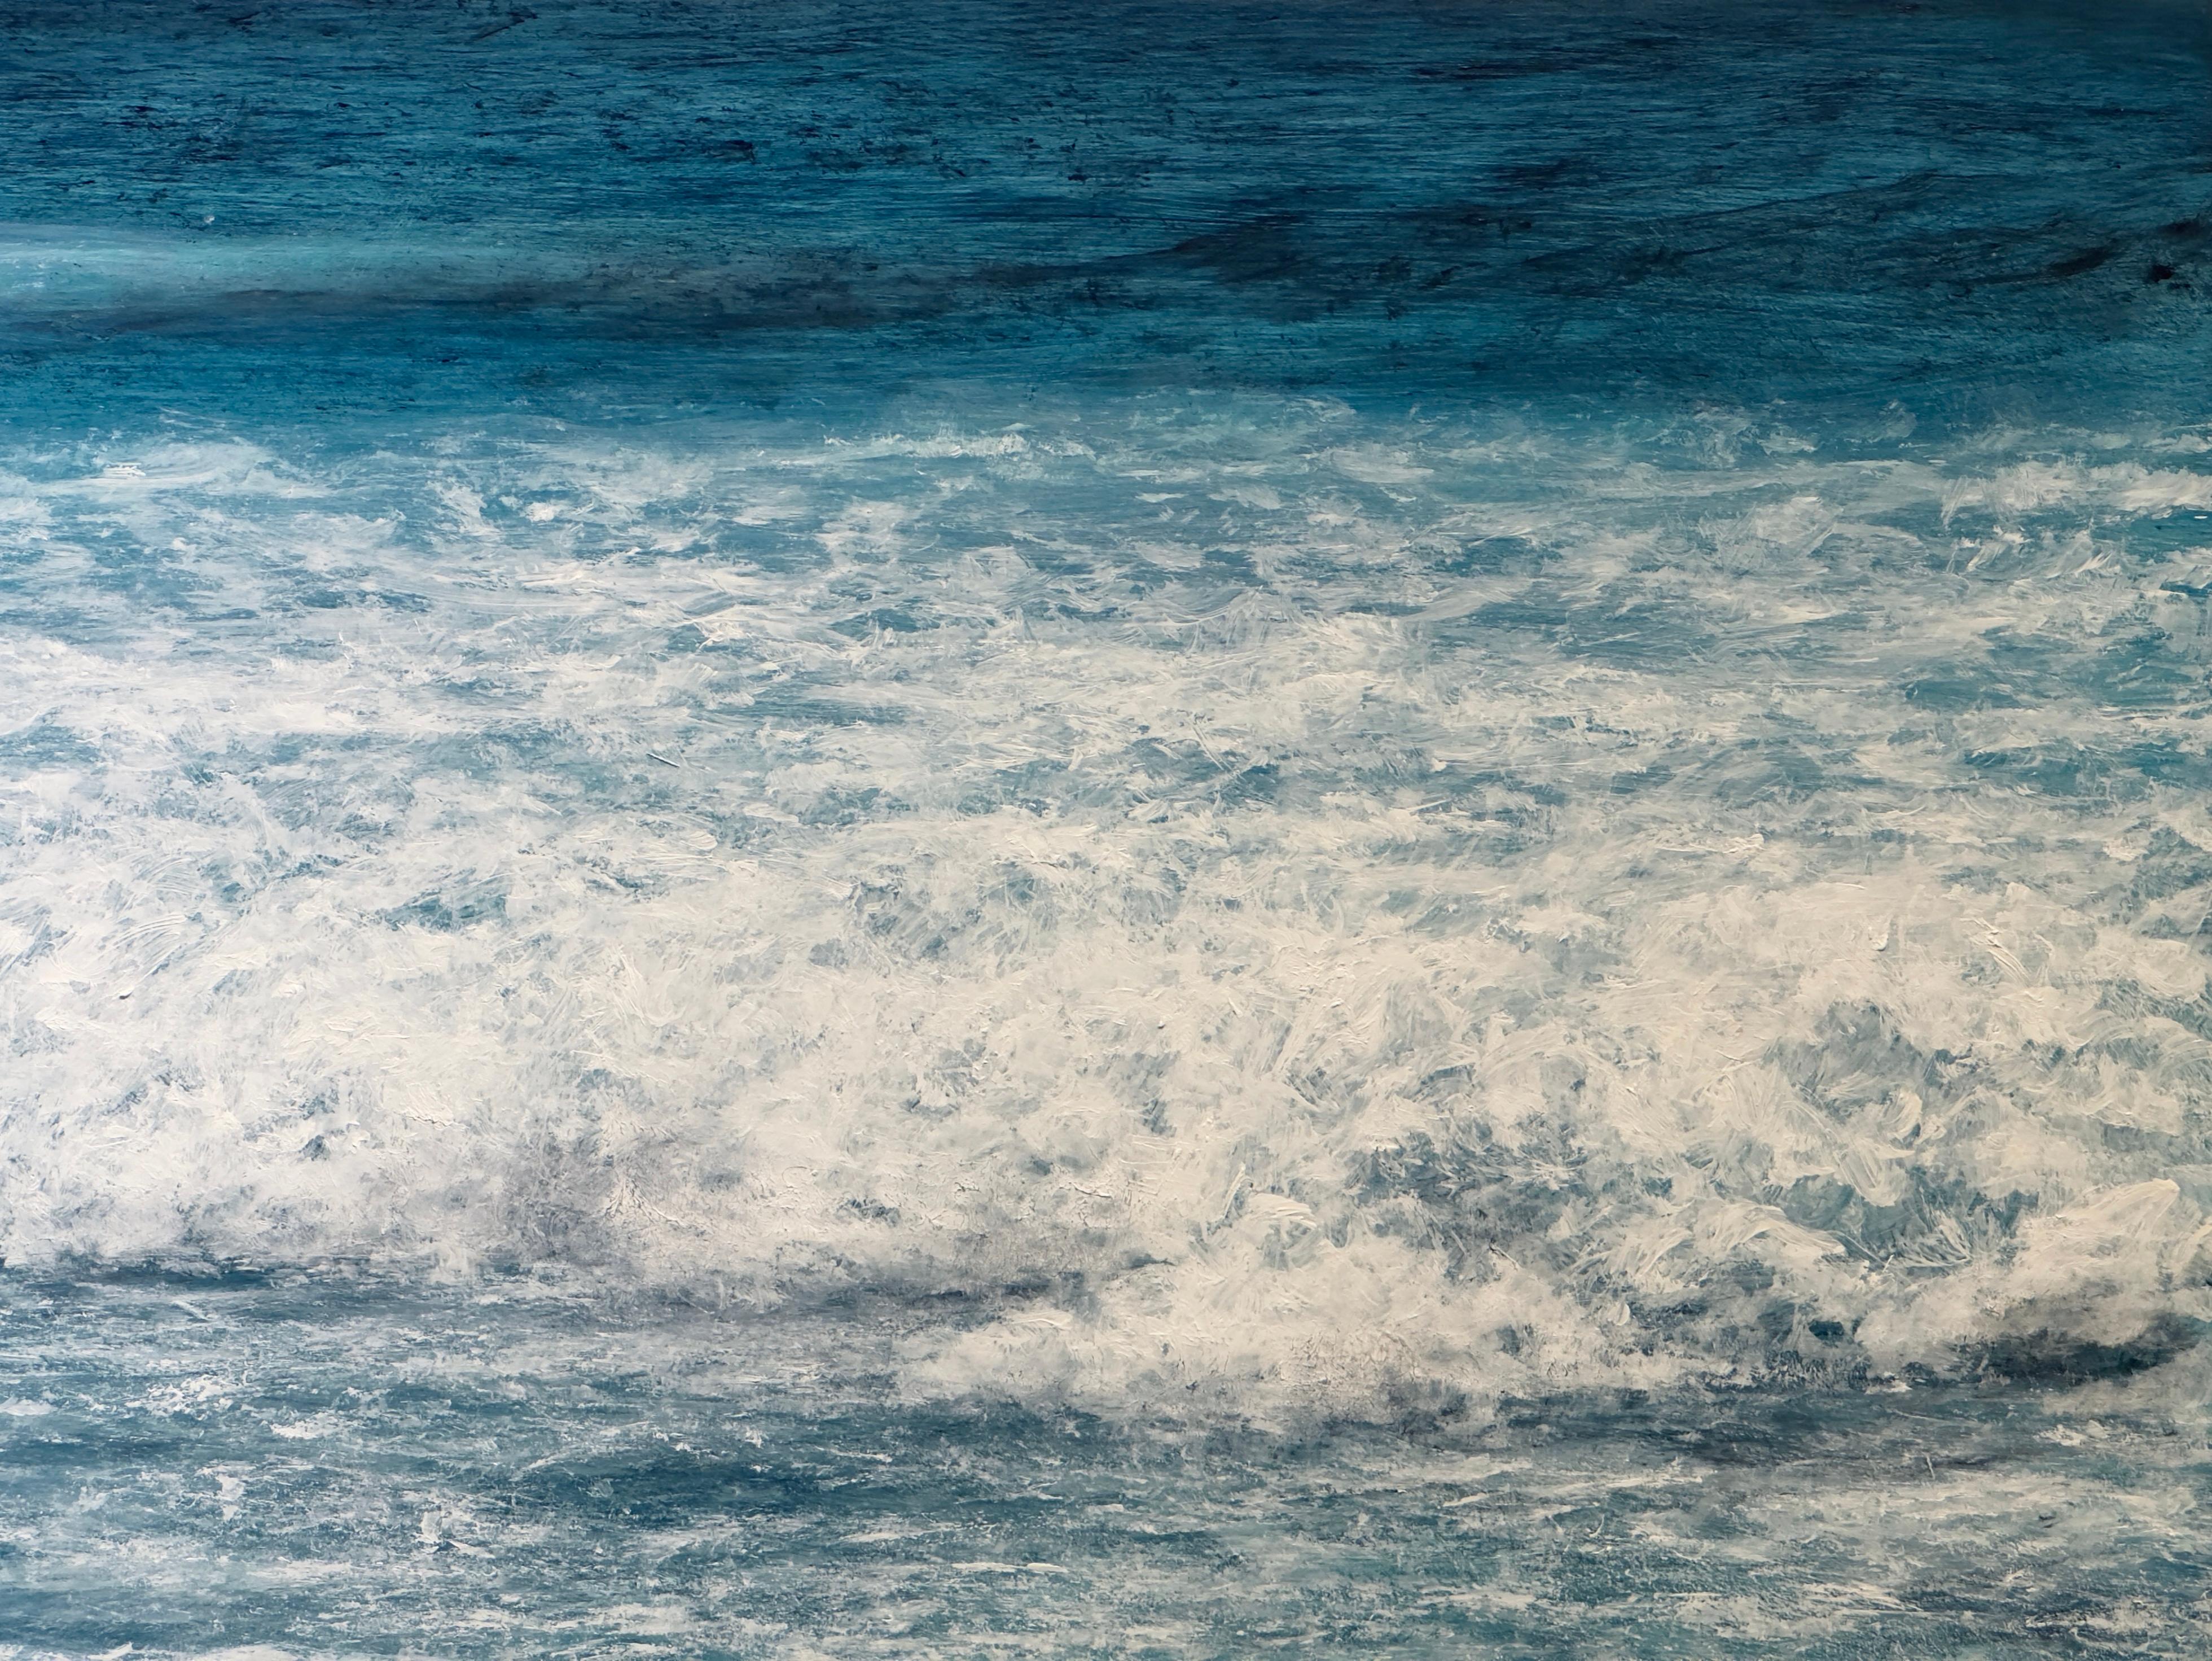 SWASH - Realism / Seascape / Blue Water - Contemporary Painting by Lisa Lebofsky